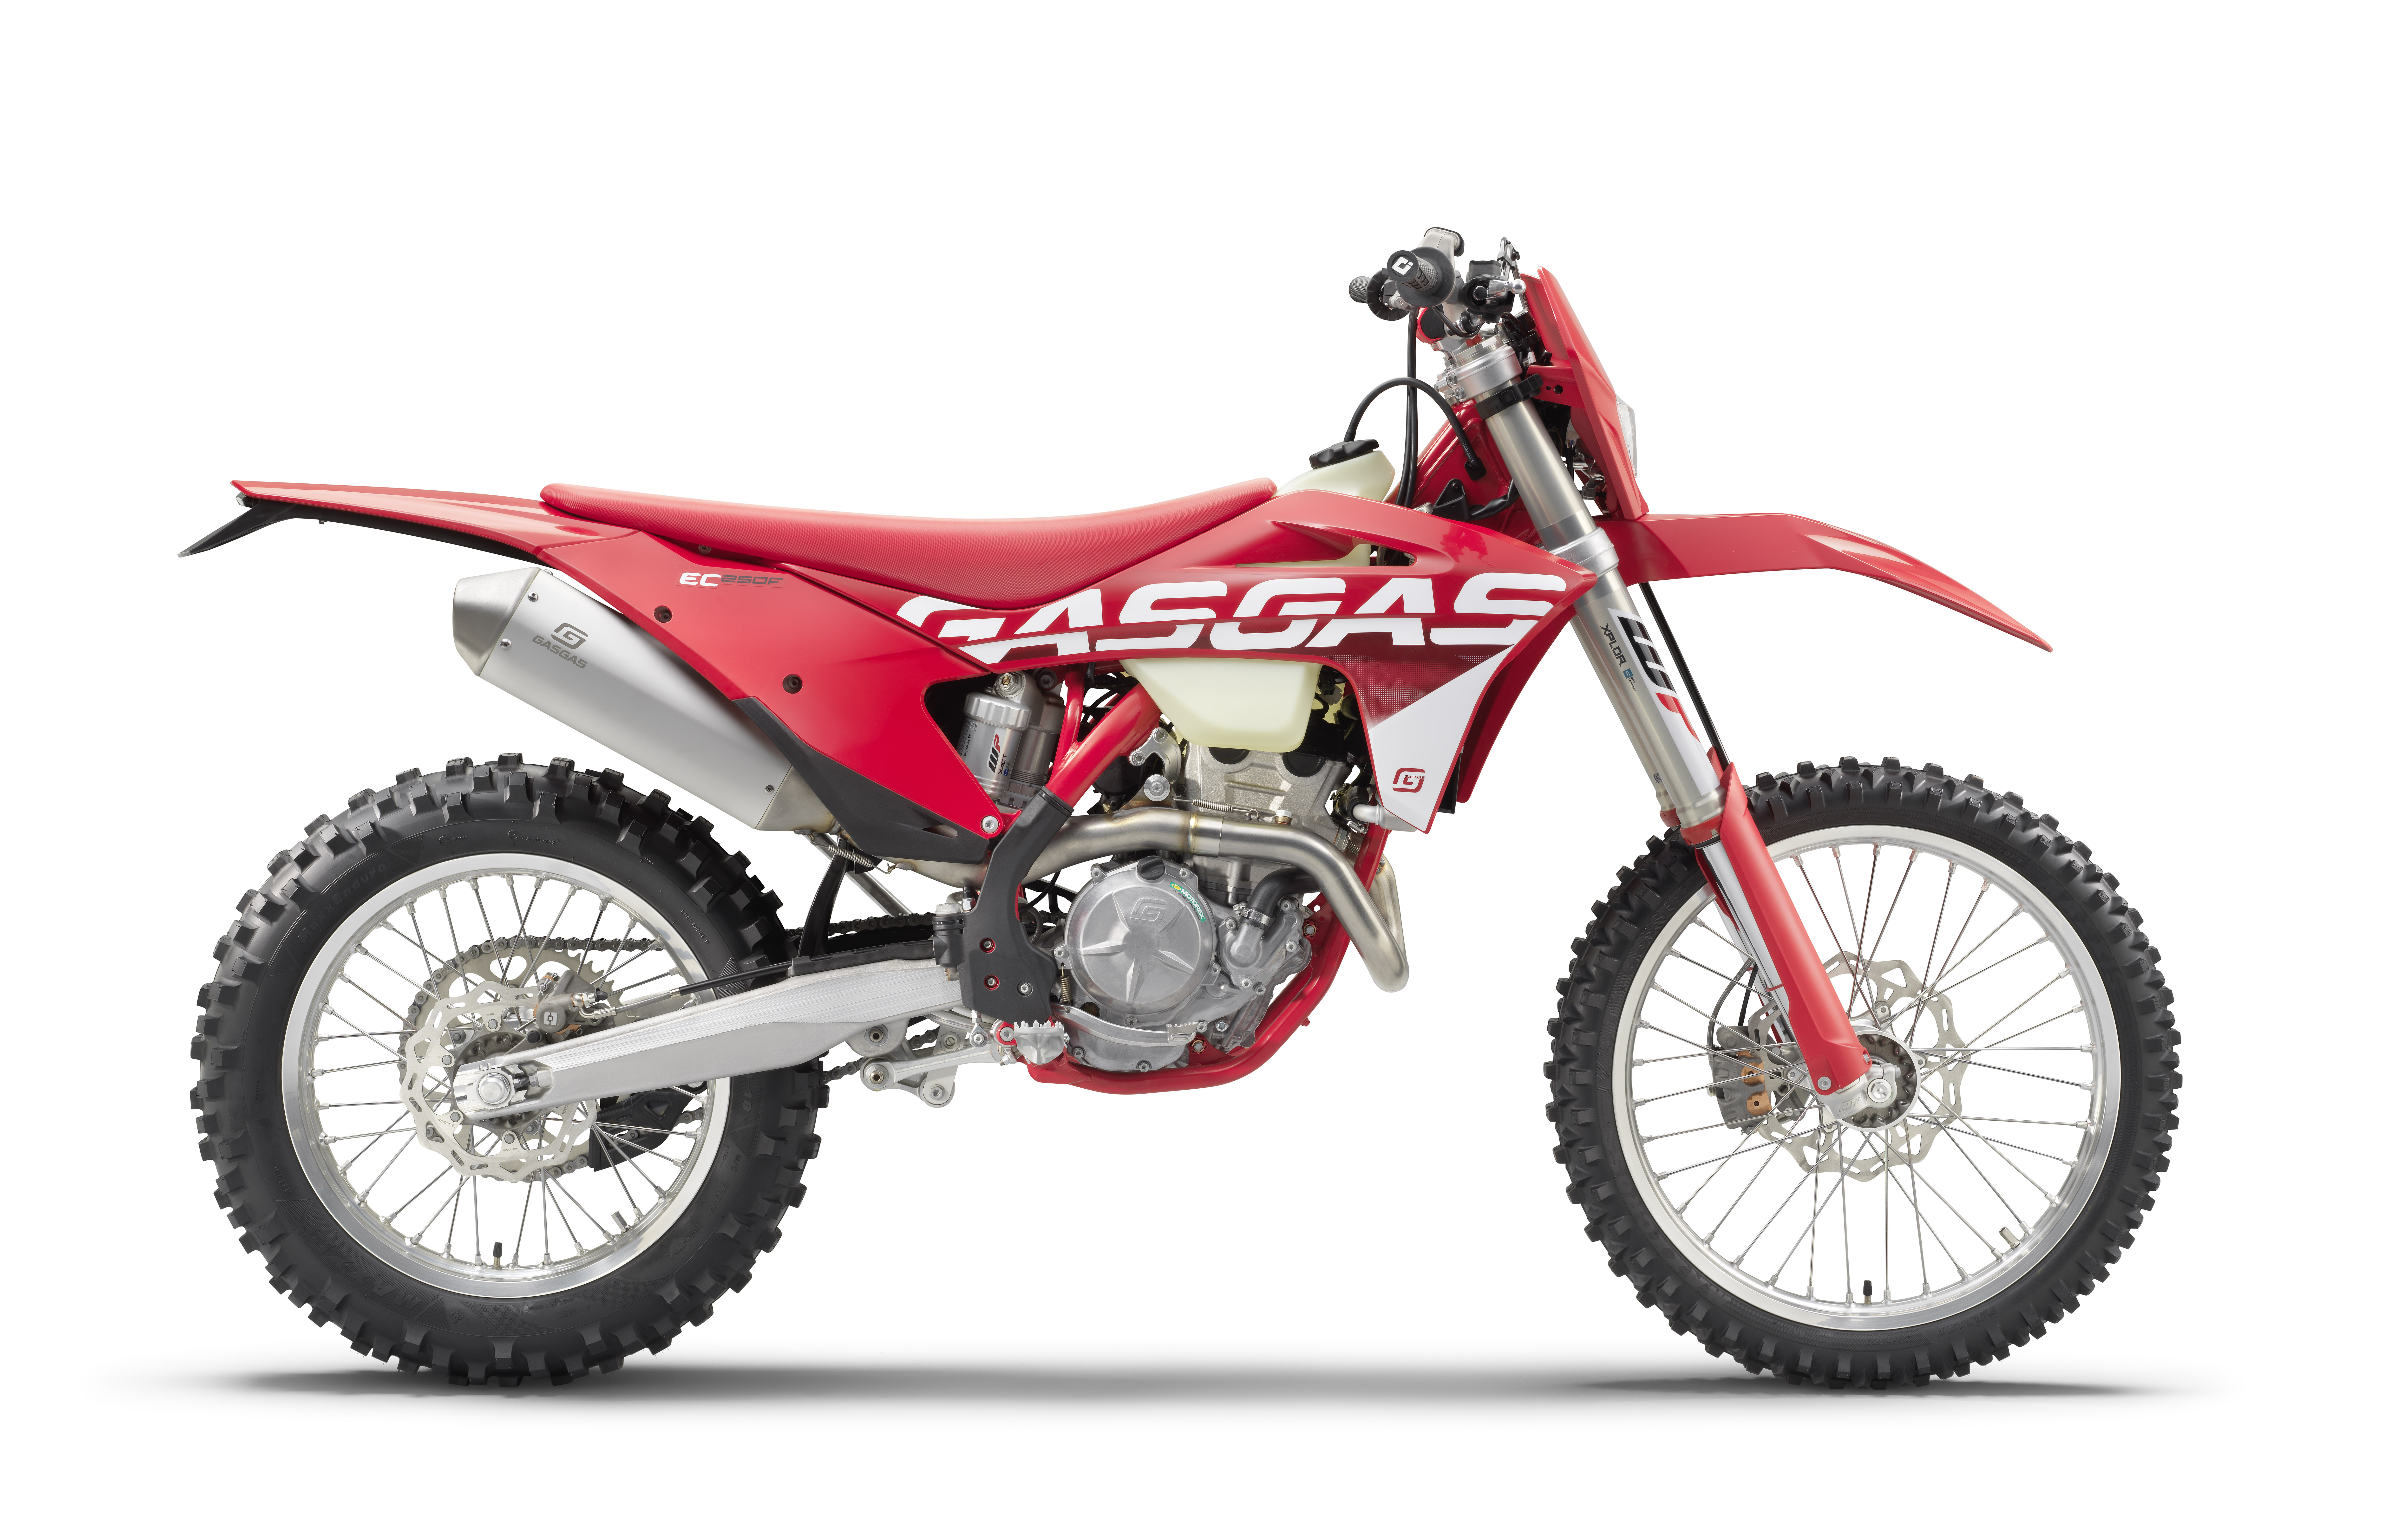 GasGas motorcycles now in Malaysia, enduro and motocross, range from RM39,500 to RM48,000 1493333